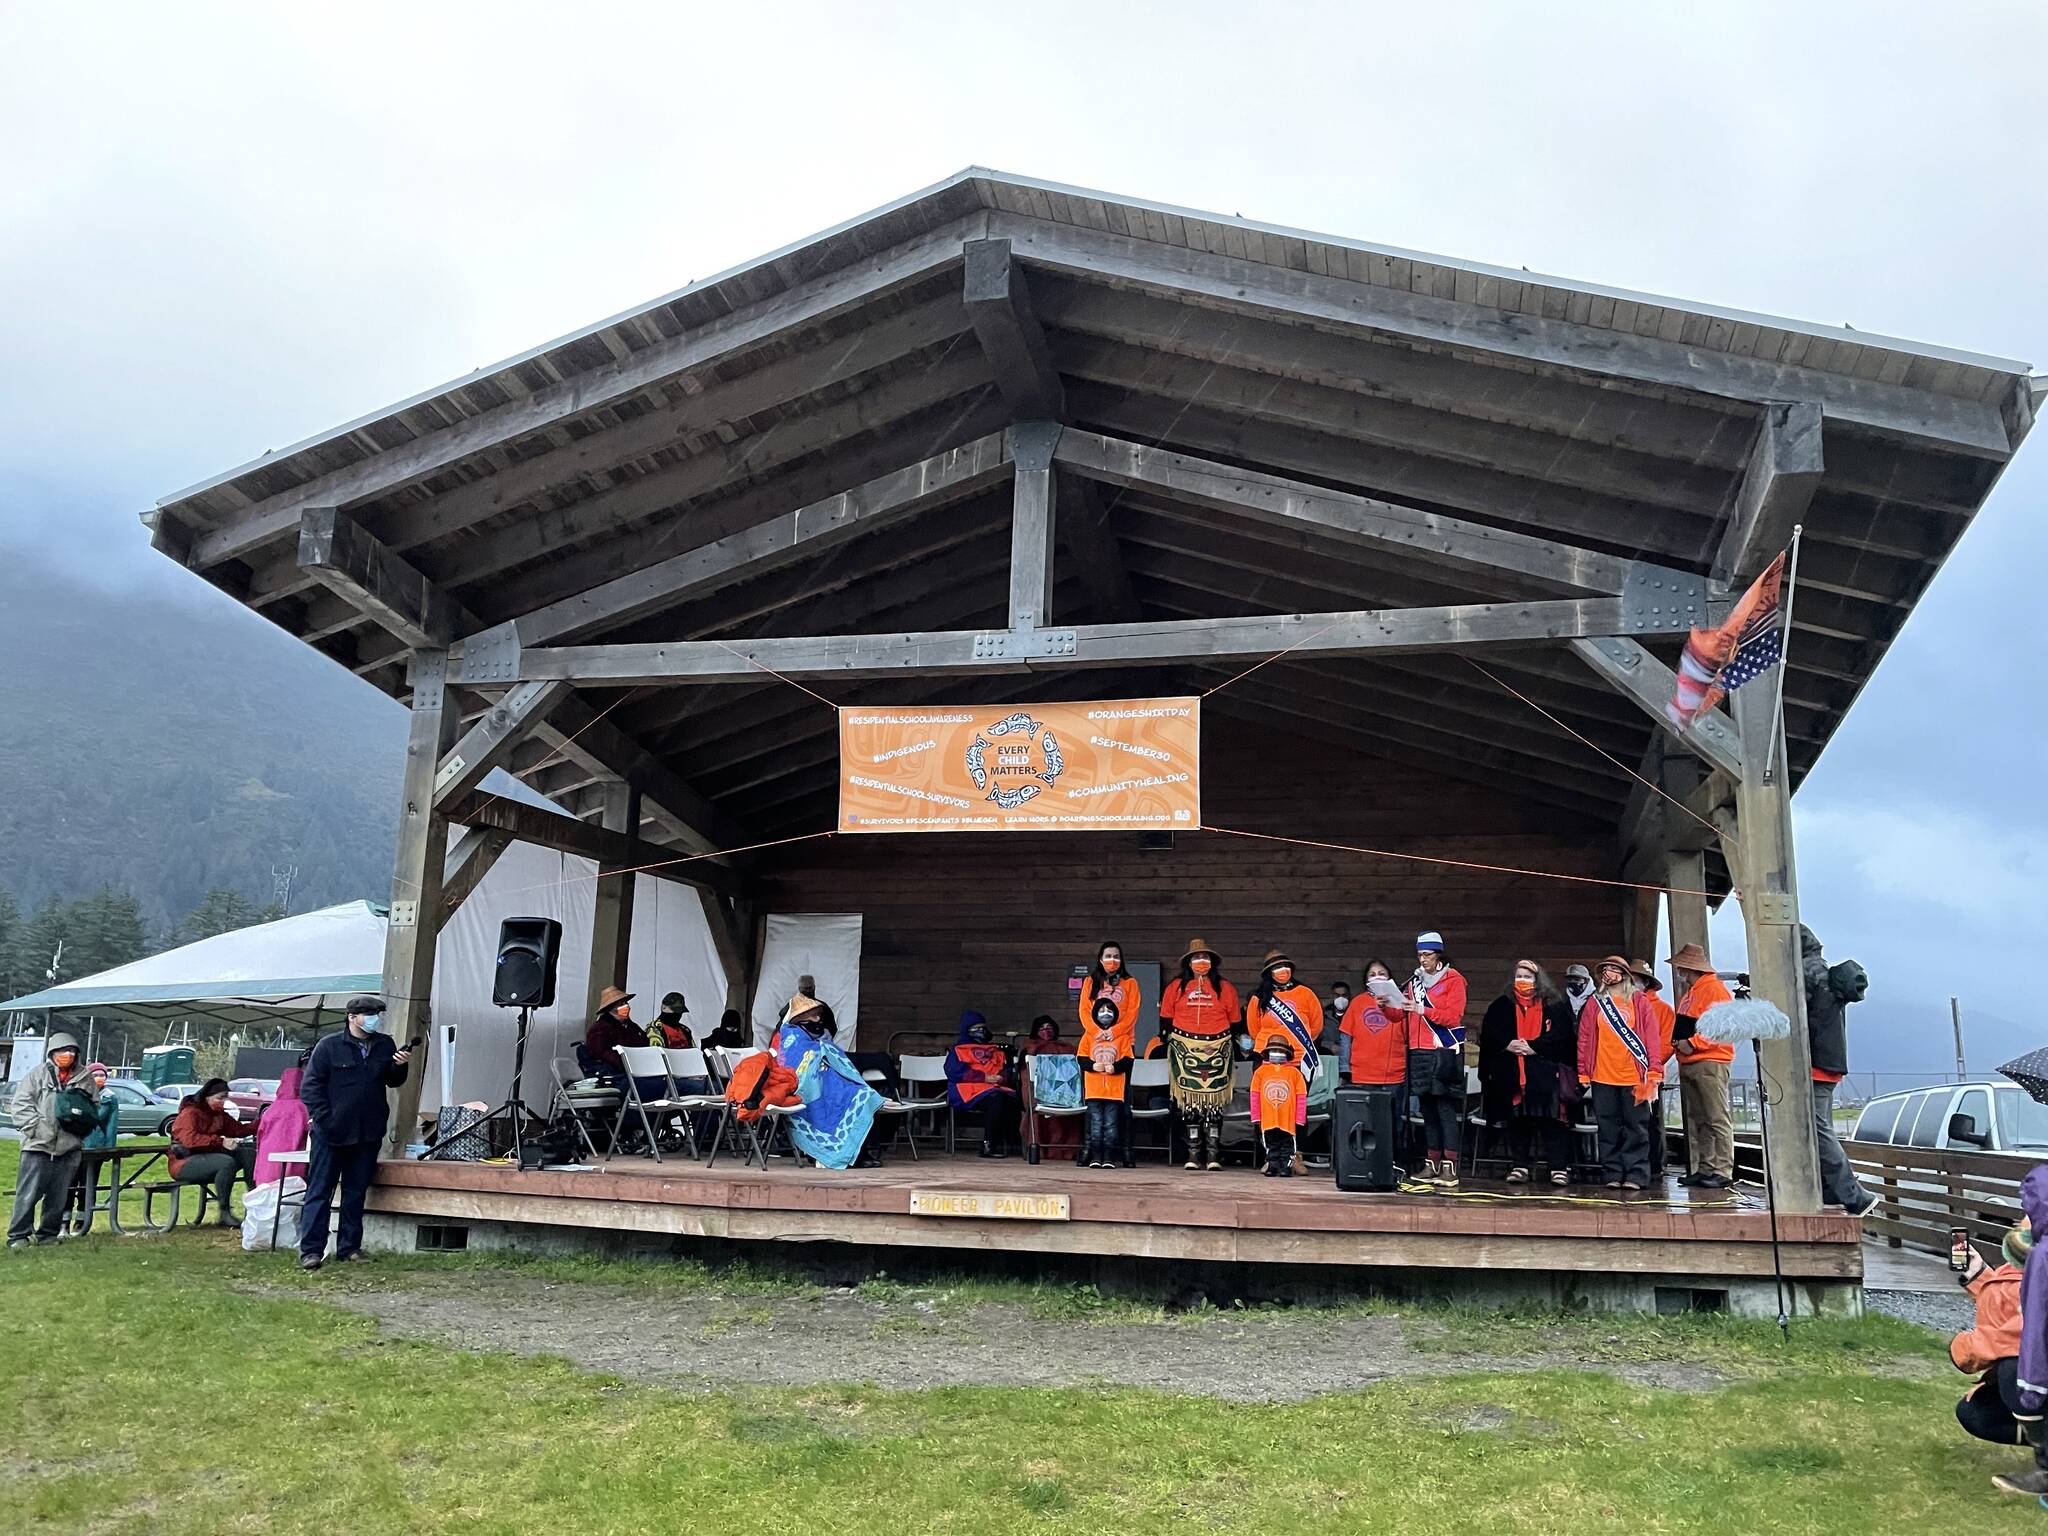 More than 100 people gathered at an Orange Shirt Day event near Sandy Beach on Sept. 30, 2021. It was the first major Orange Shirt Day event in Juneau, but organizers say it won’t be the last. (Michael S. Lockett / Juneau Empire)